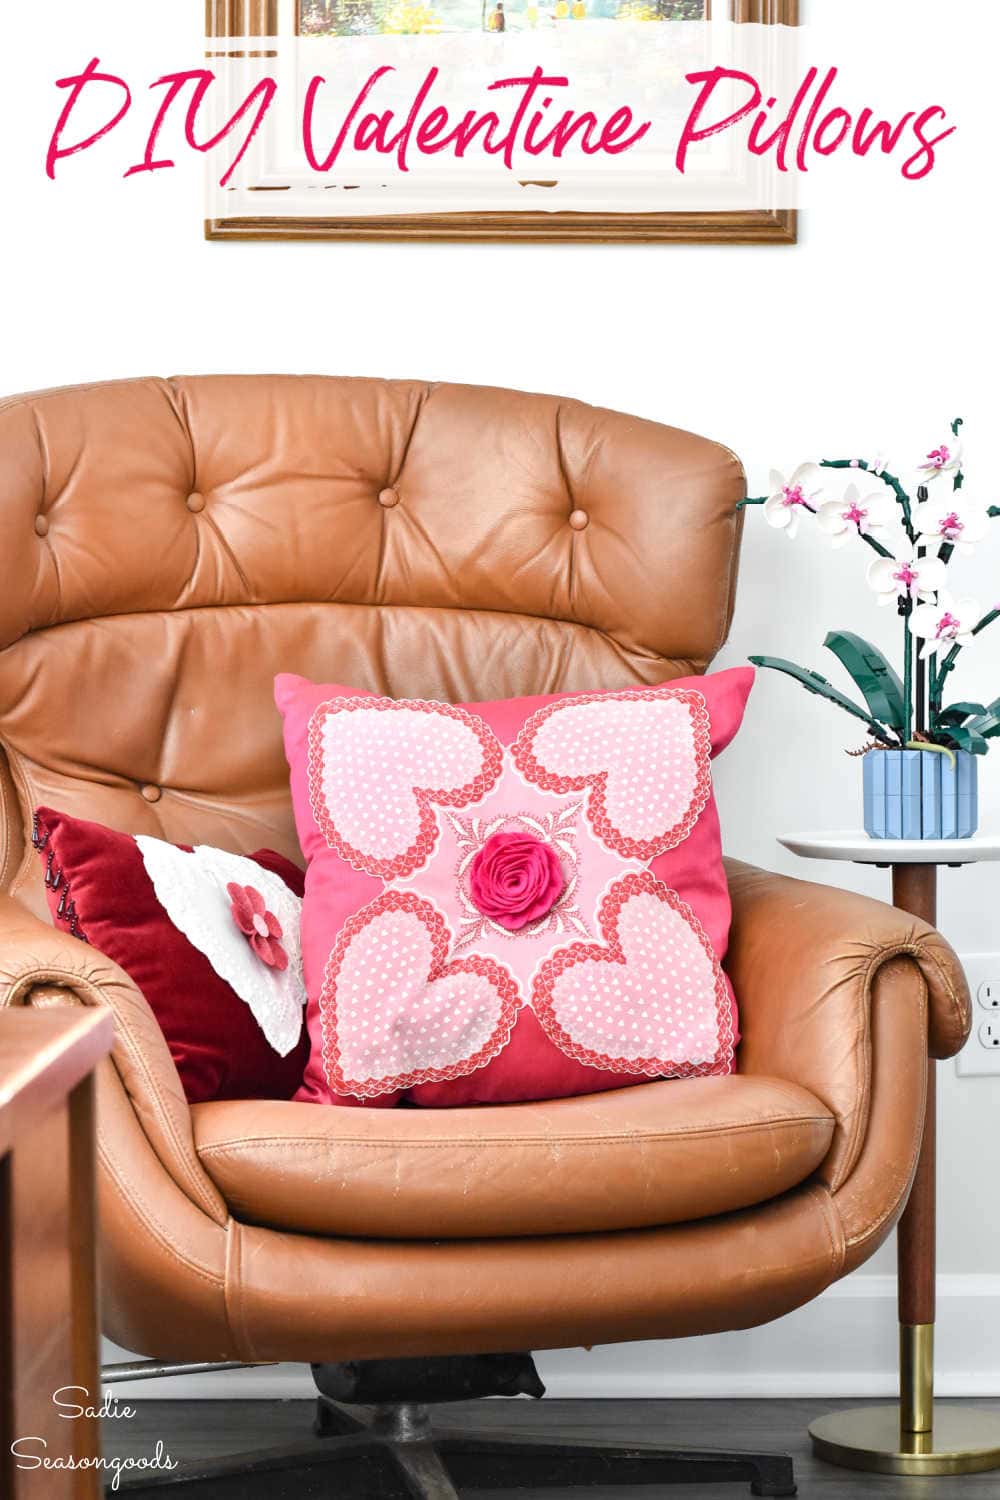 throw pillows that have been decorated with heart doilies